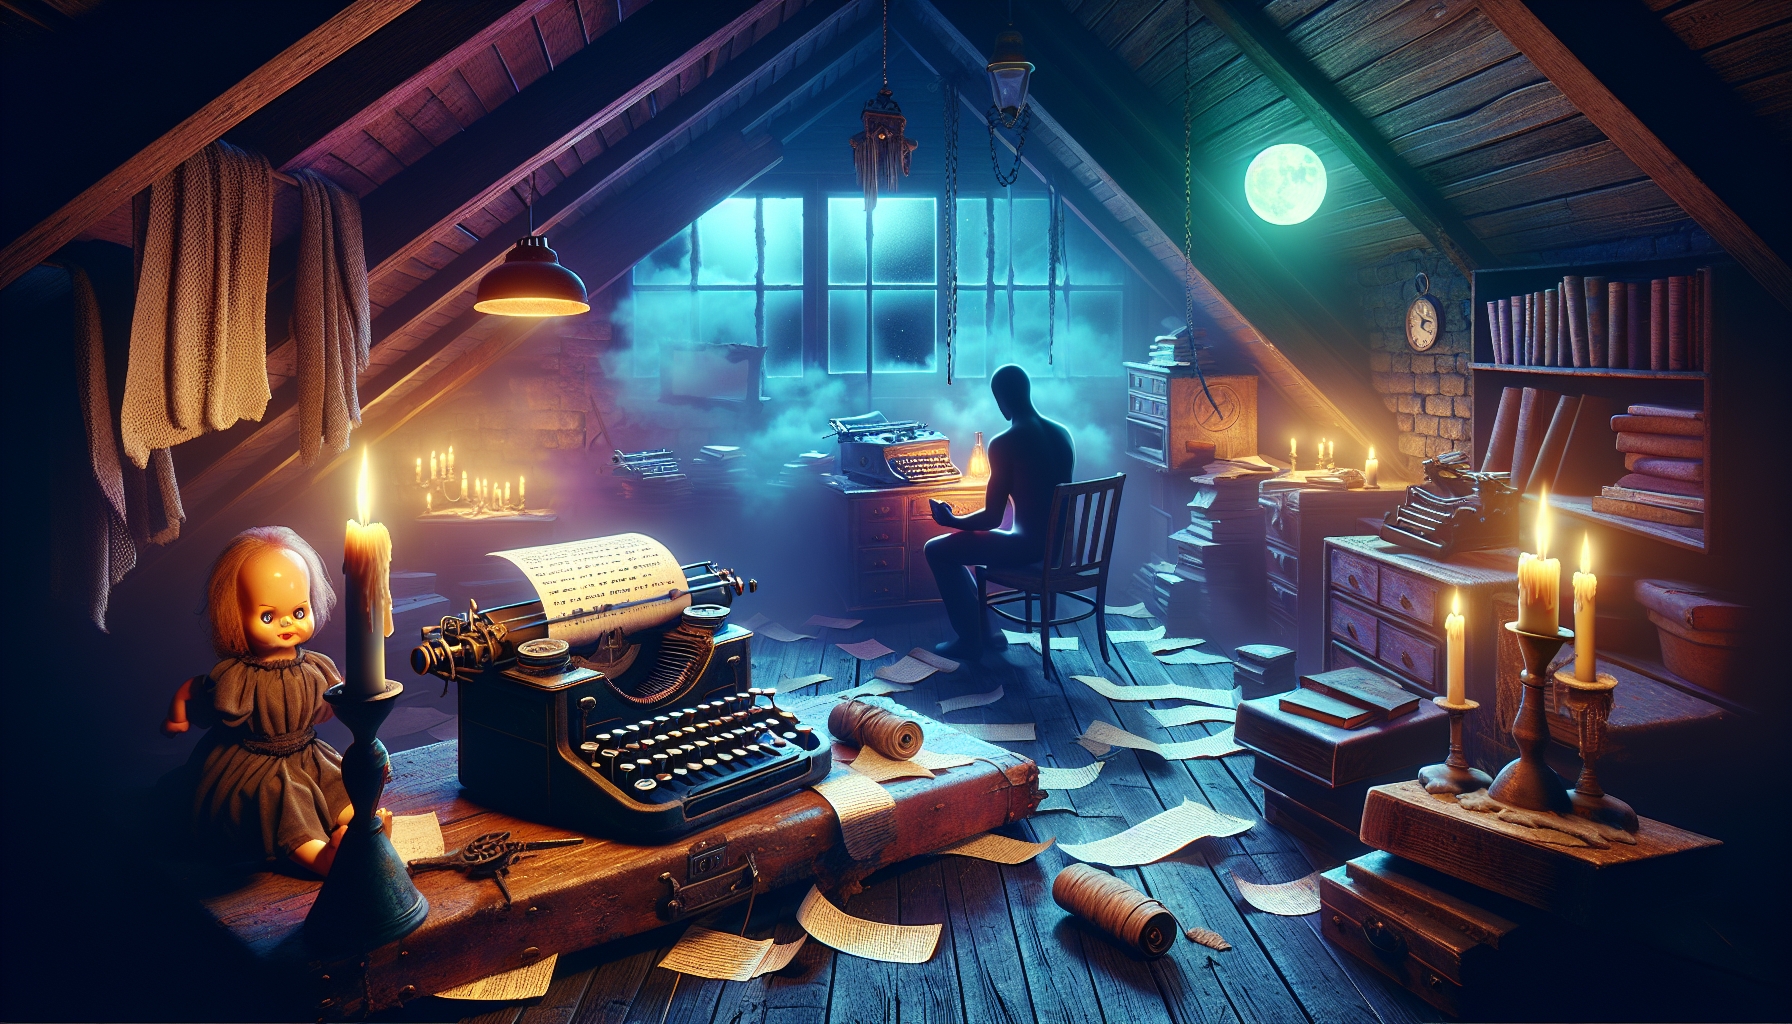 A dimly lit, eerie attic with an old typewriter on a wooden desk, scattered pages around, and a shadowy figure holding a script, surrounded by iconic horror elements like a creaky doll, flickering can